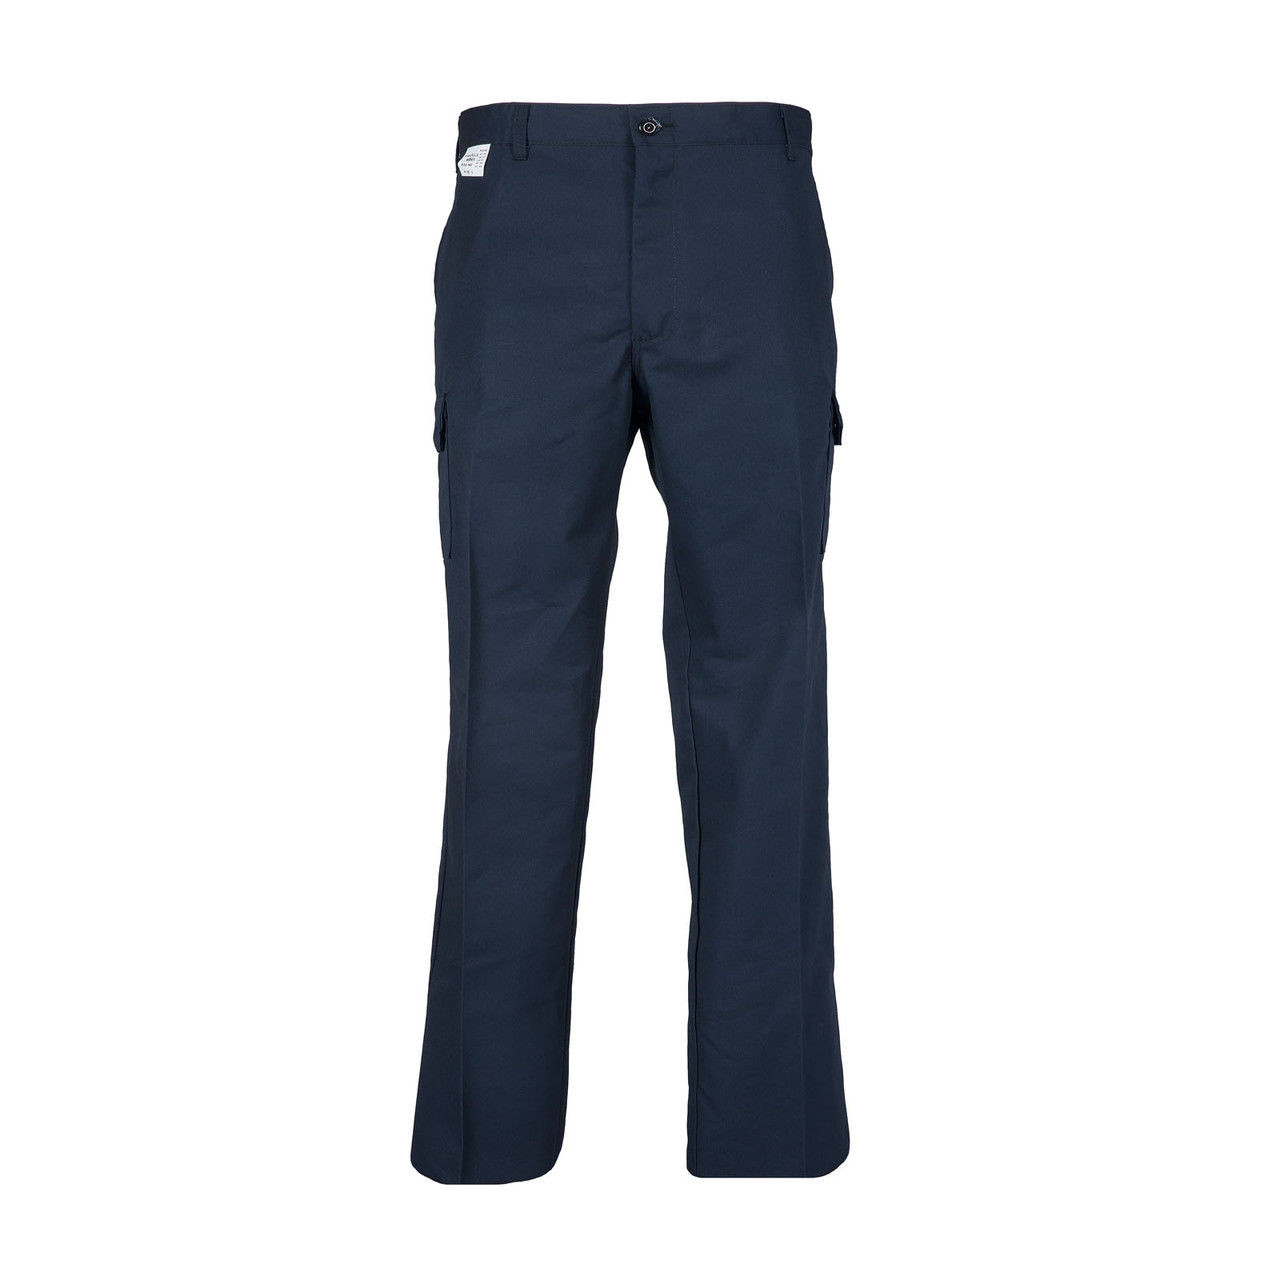 Royal and Awesome Men`s Golf Pants Best Laid Plans Blue Golf Pants 30 - 44